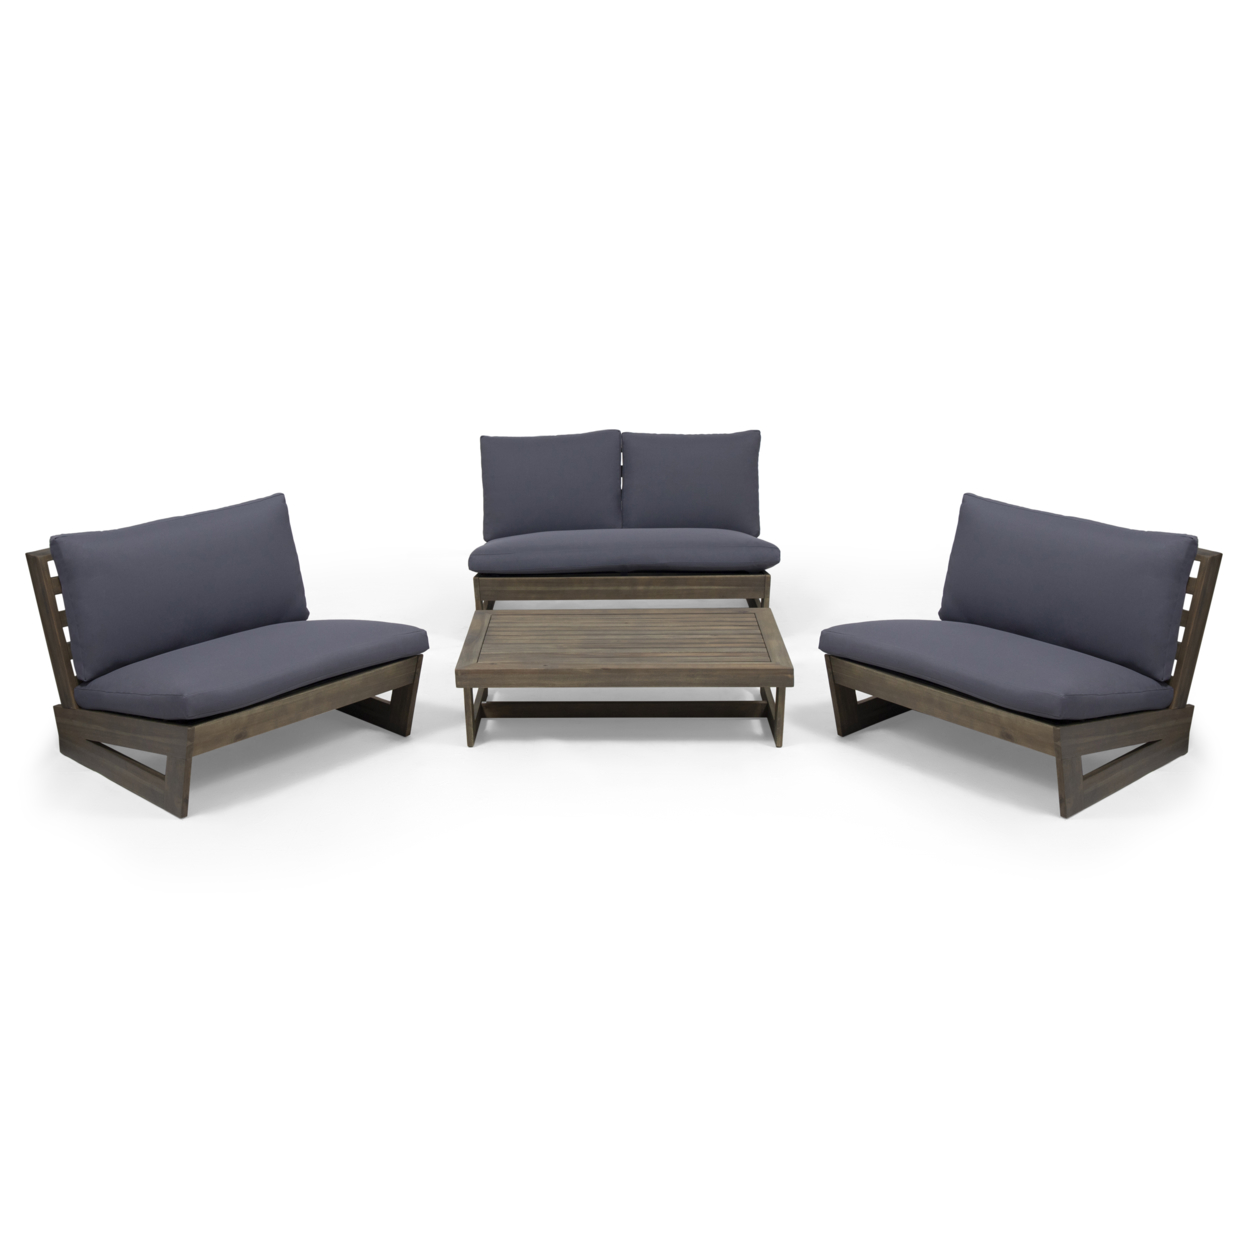 Beulah Outdoor 4 Seater Chat Set With Coffee Table - Gray Finish, Dark Gray